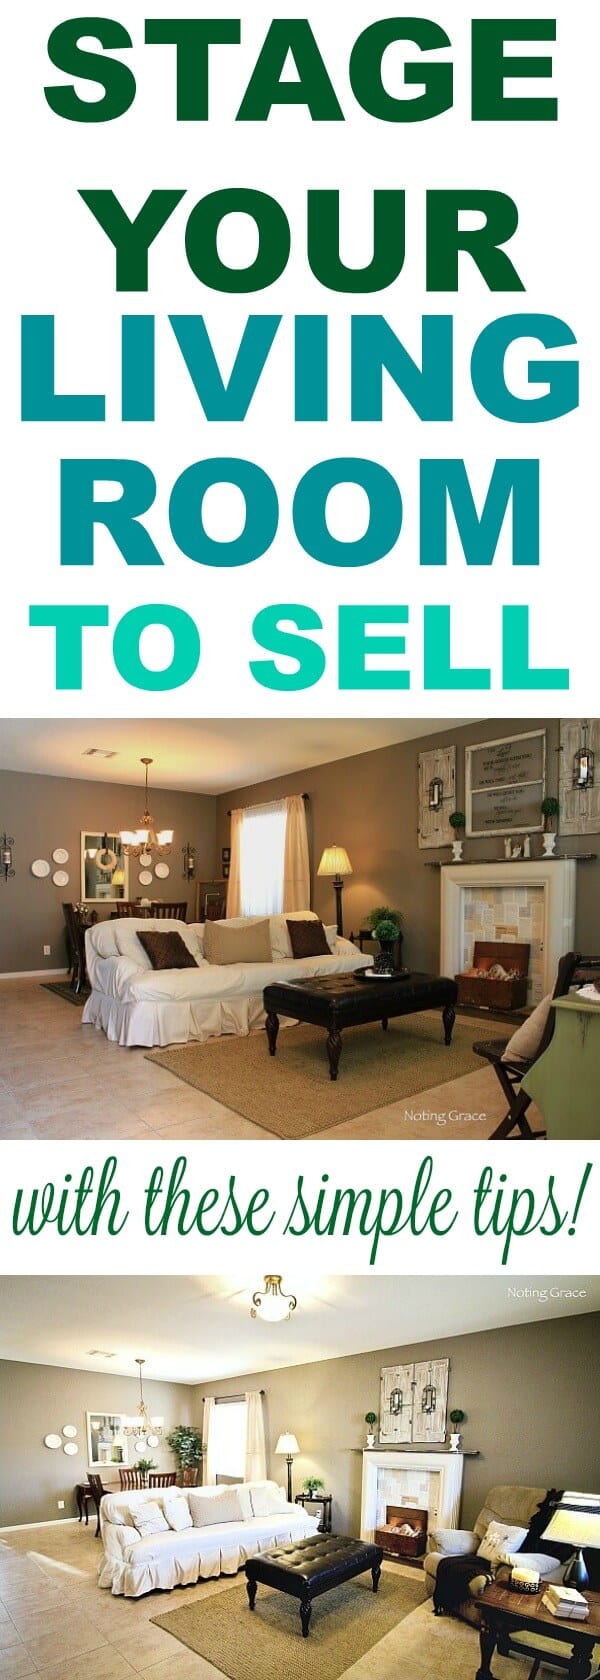 How to stage your living room to sell with these simple tips! Get the most for your home.